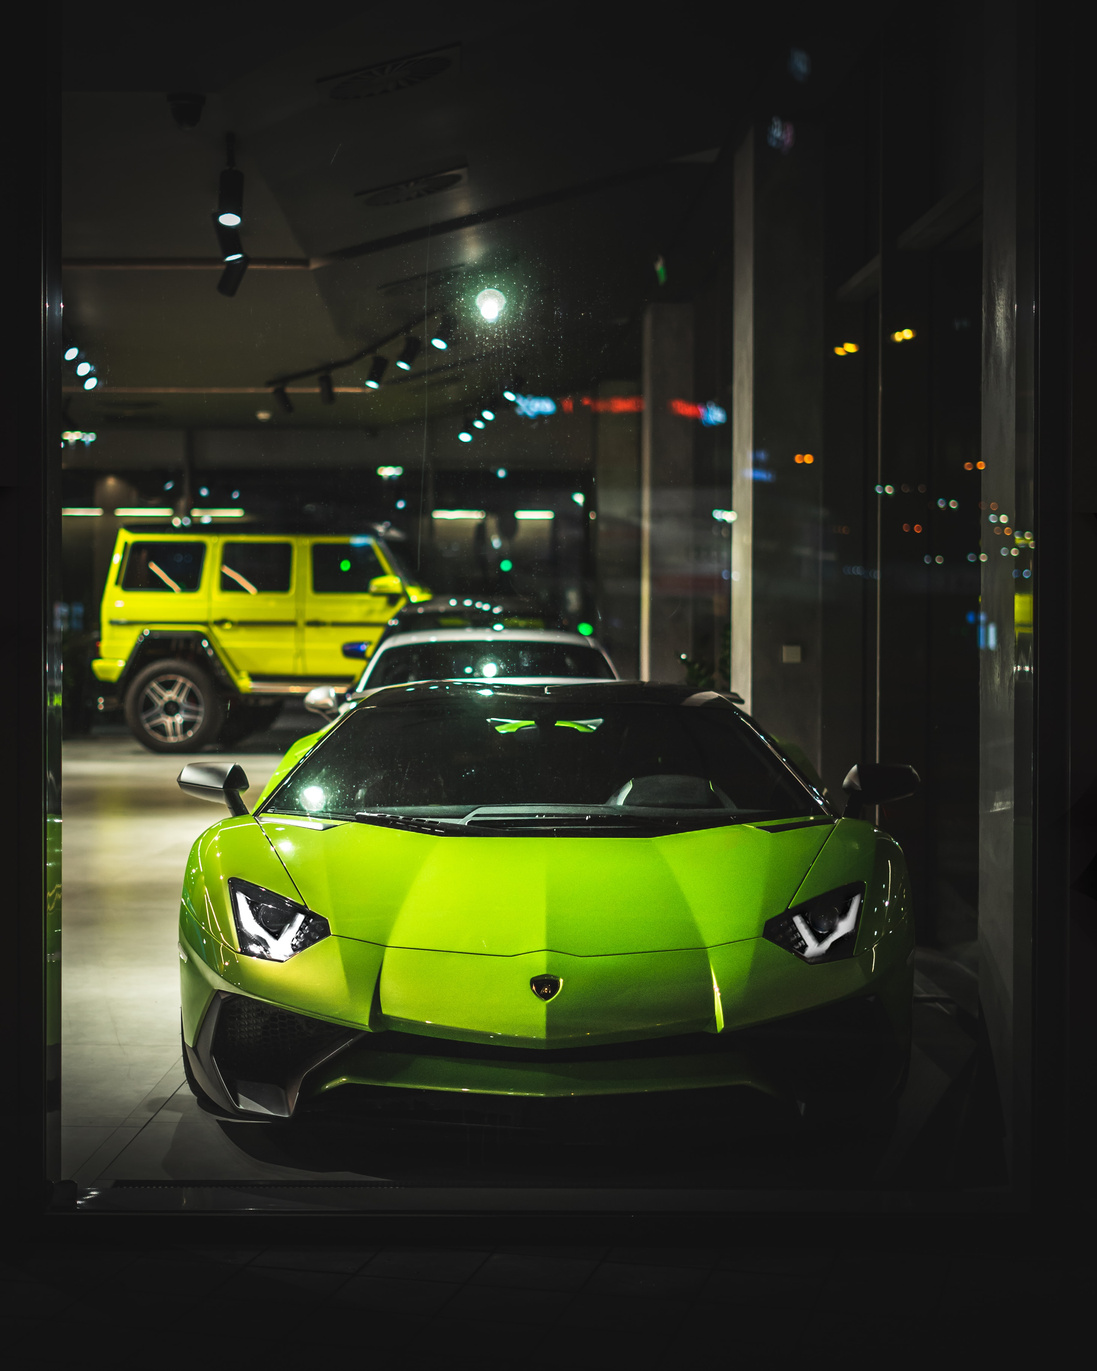 Green Luxury Car Parked in a Car Dealership Building